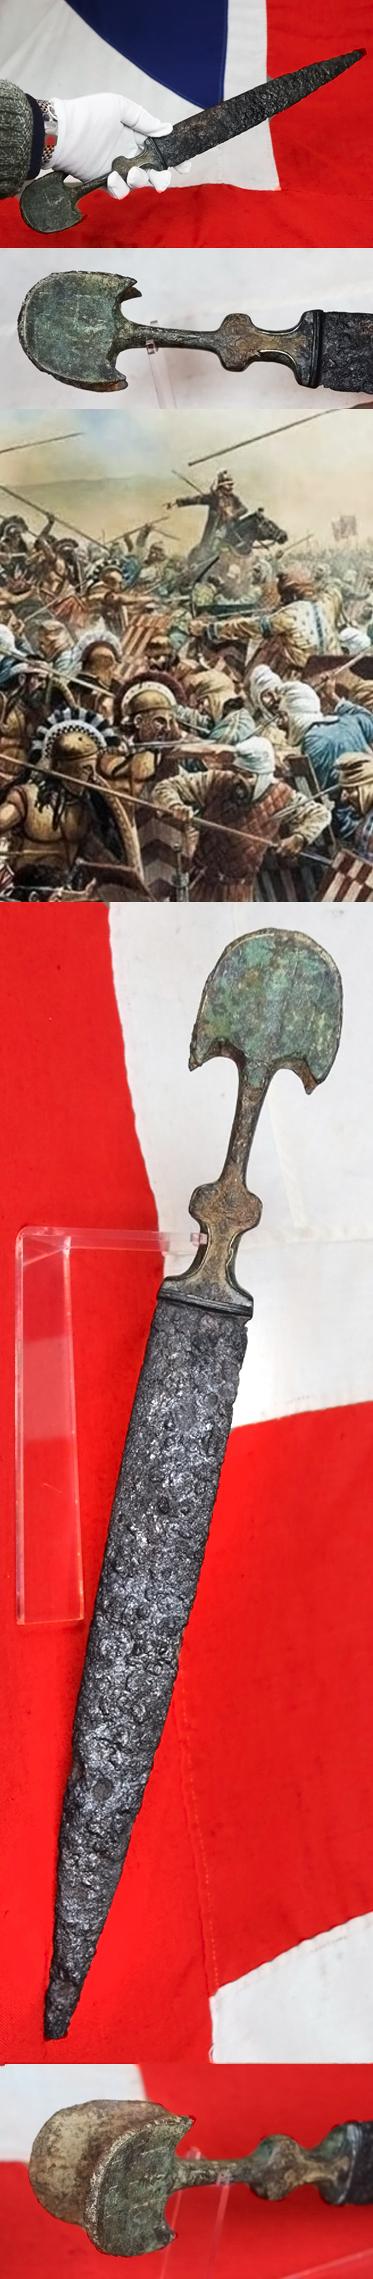 An Fabulous Bronze and Iron Archemeanid Empire Sword From the Time of the Greco-Persian Wars of Xerxes the Great Against the Spartans at Thermopylae. The Very Type of Sword Actually Used As Depicted in The Movie 300 Spartans